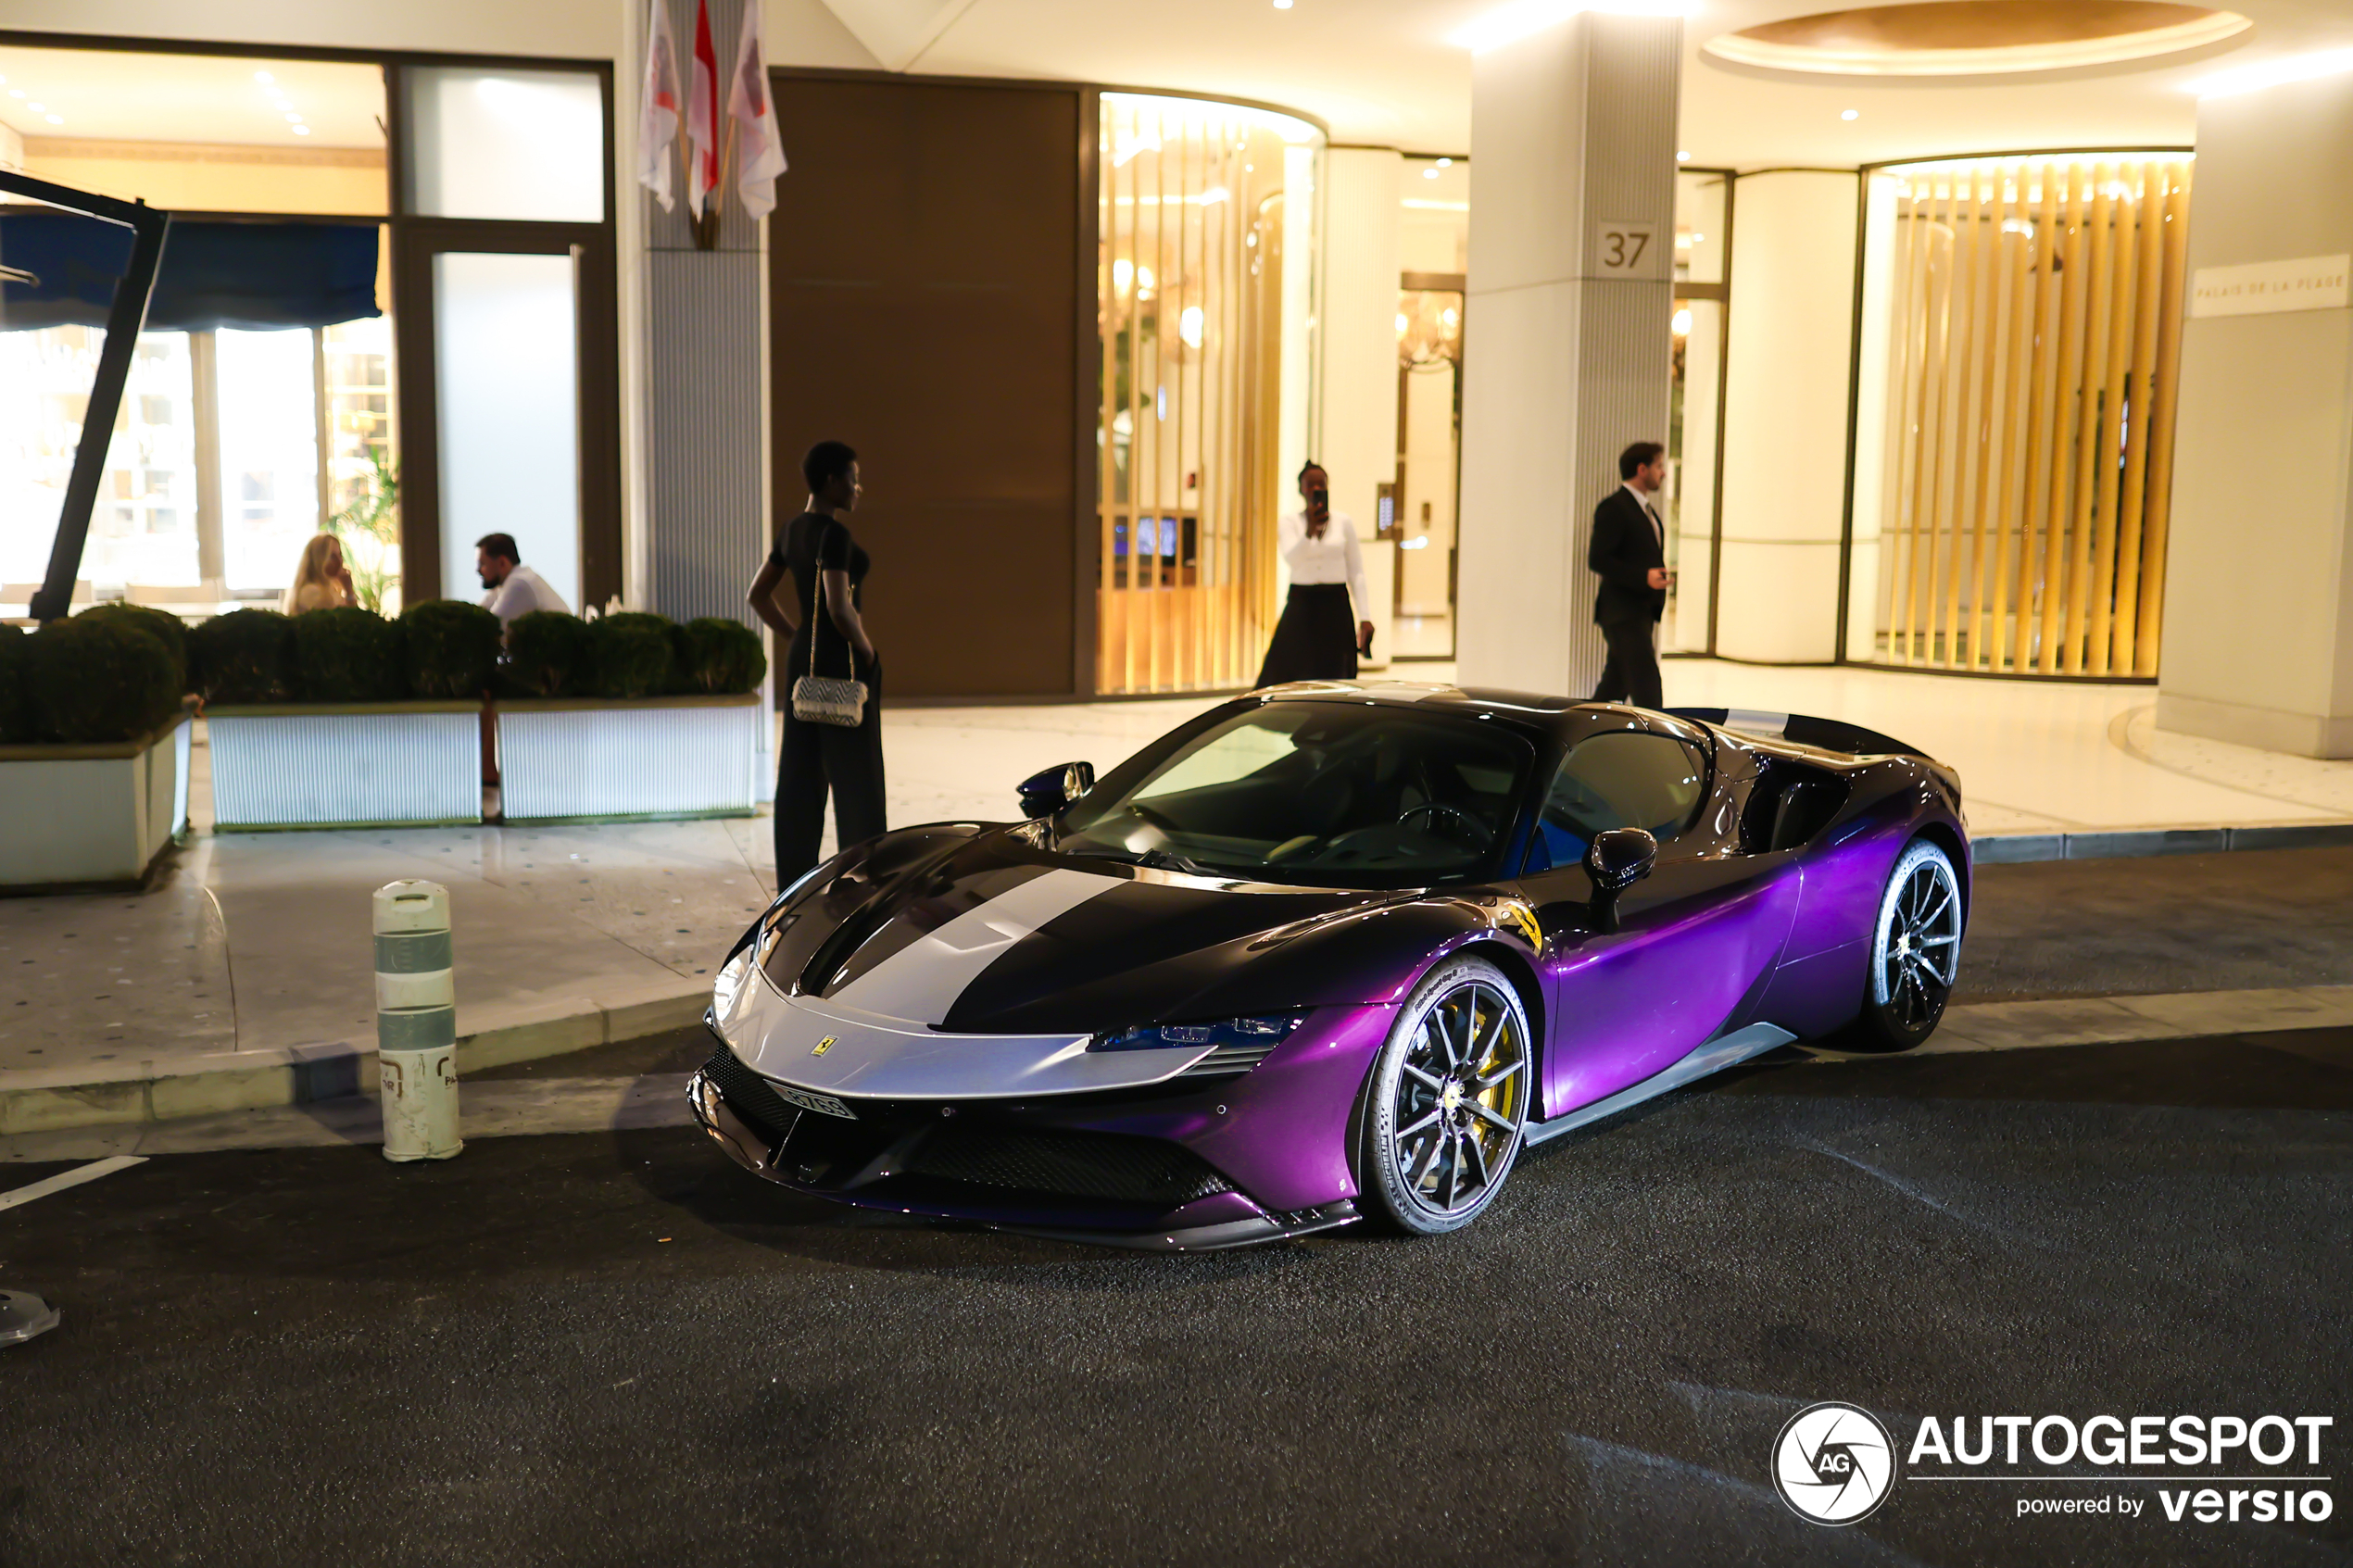 The beautiful violet SF90 Spider emerges again in Monaco.